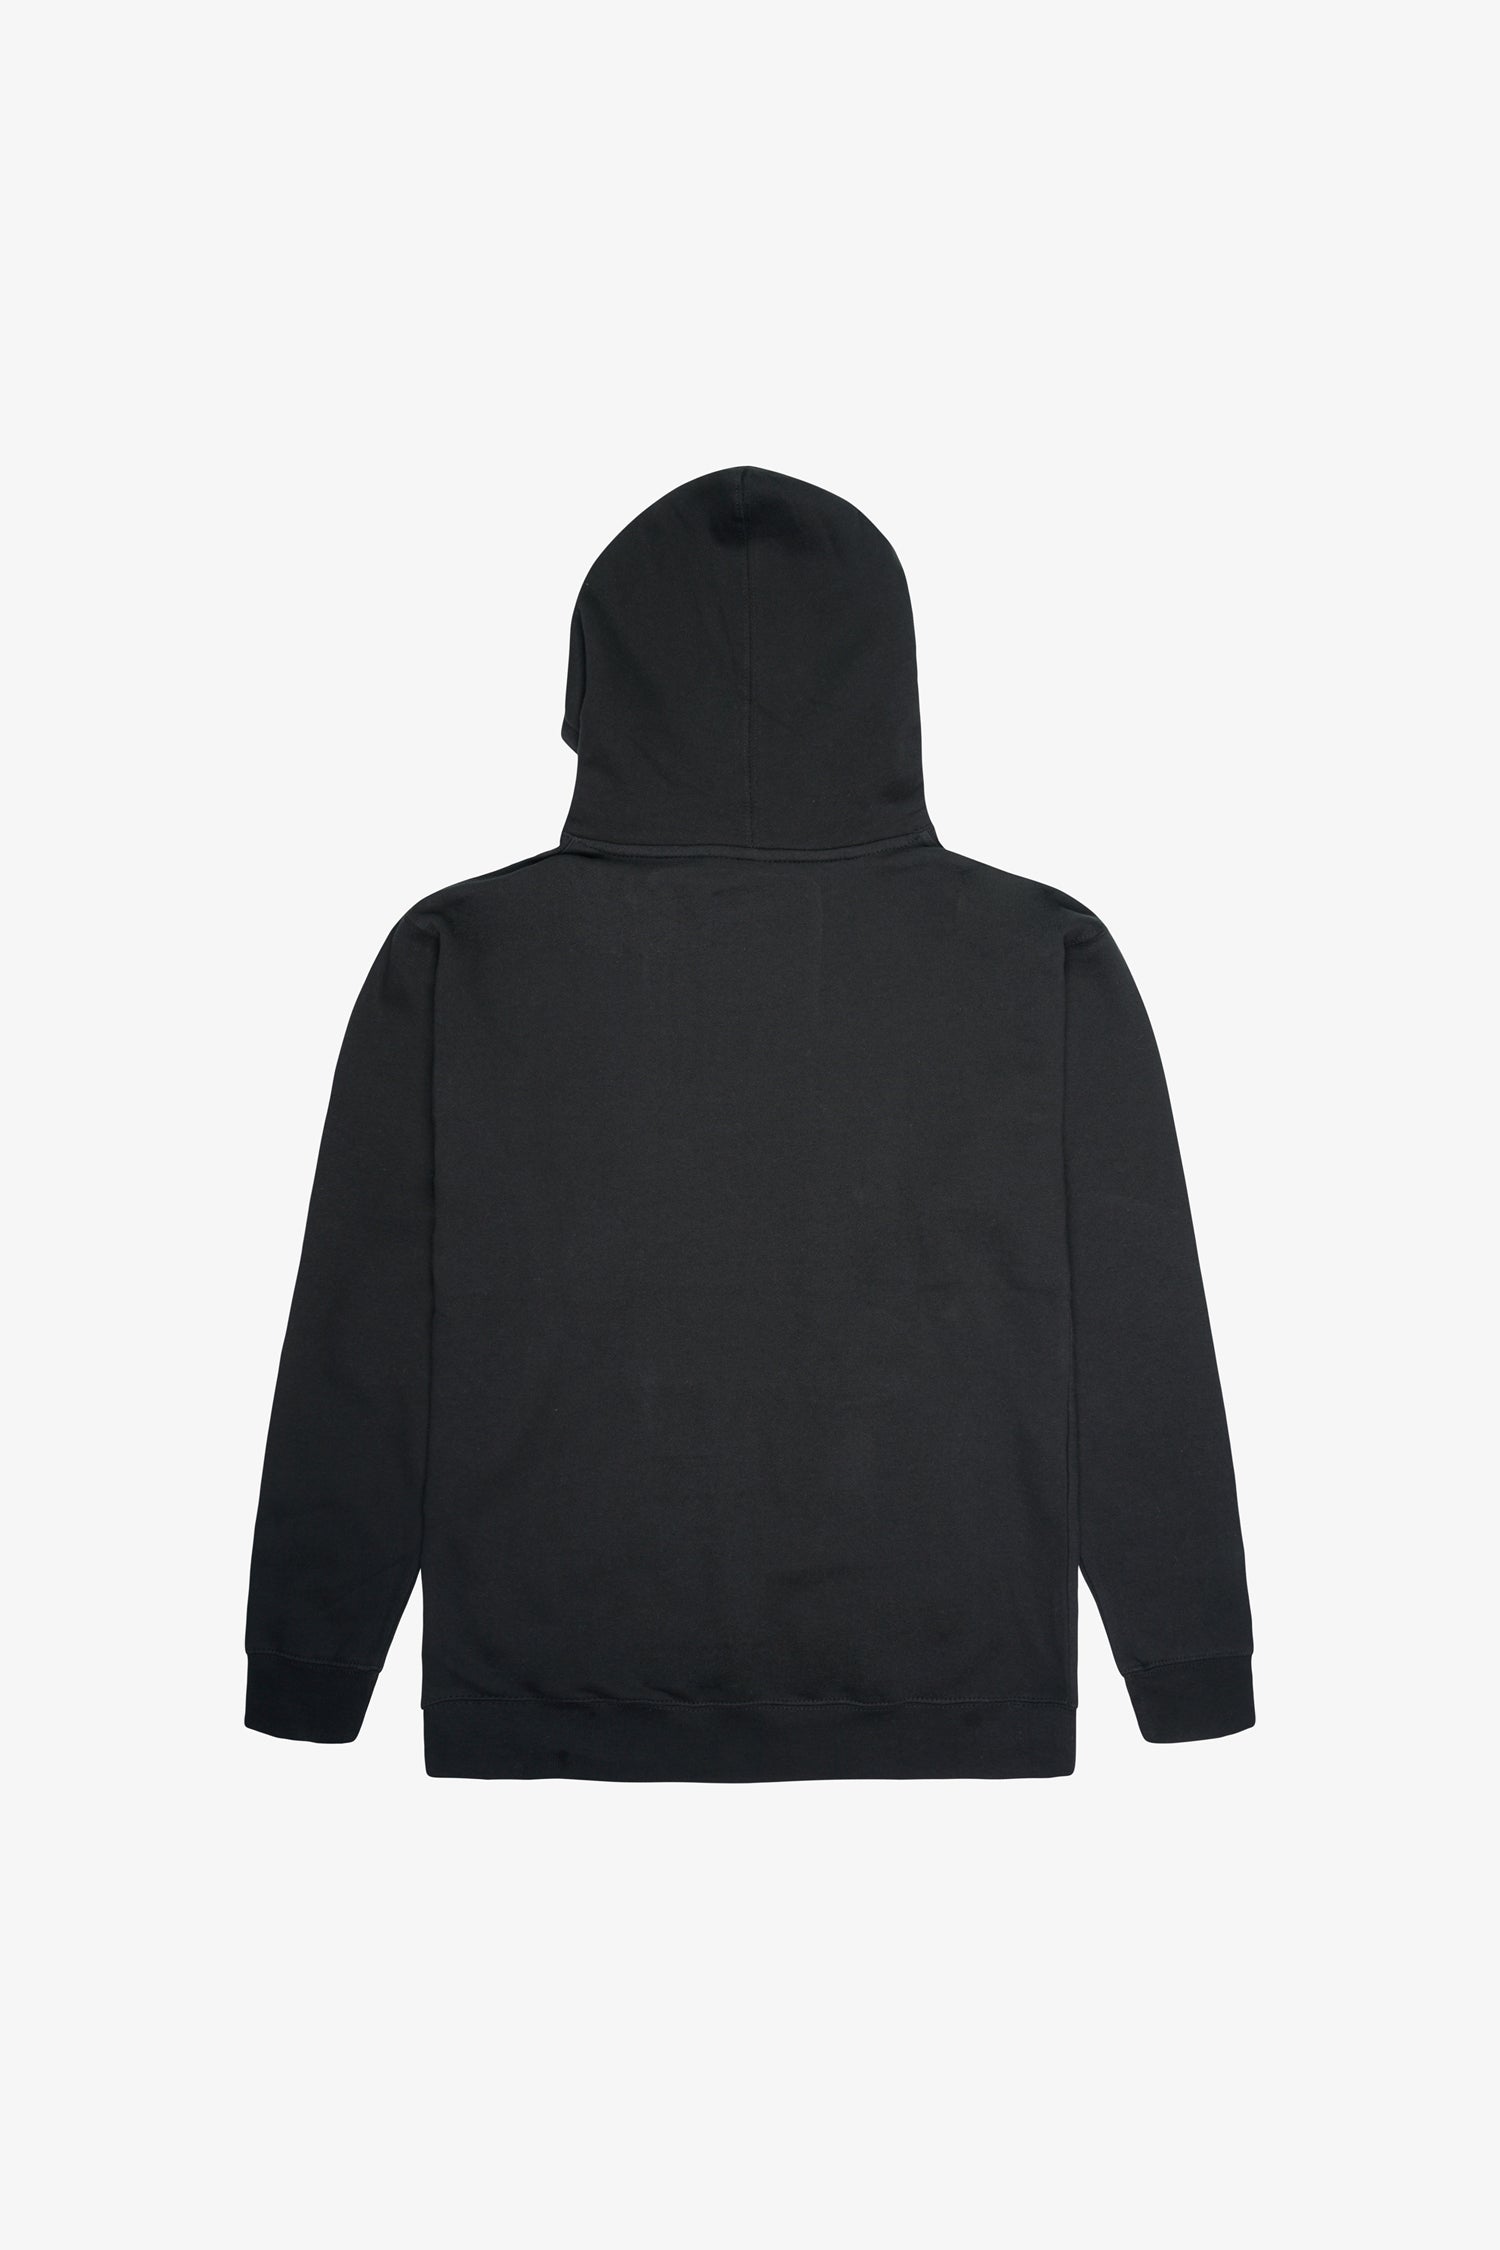 Selectshop FRAME - PARADIS3 Can't Touch This Hoodie Sweats-Knits Dubai